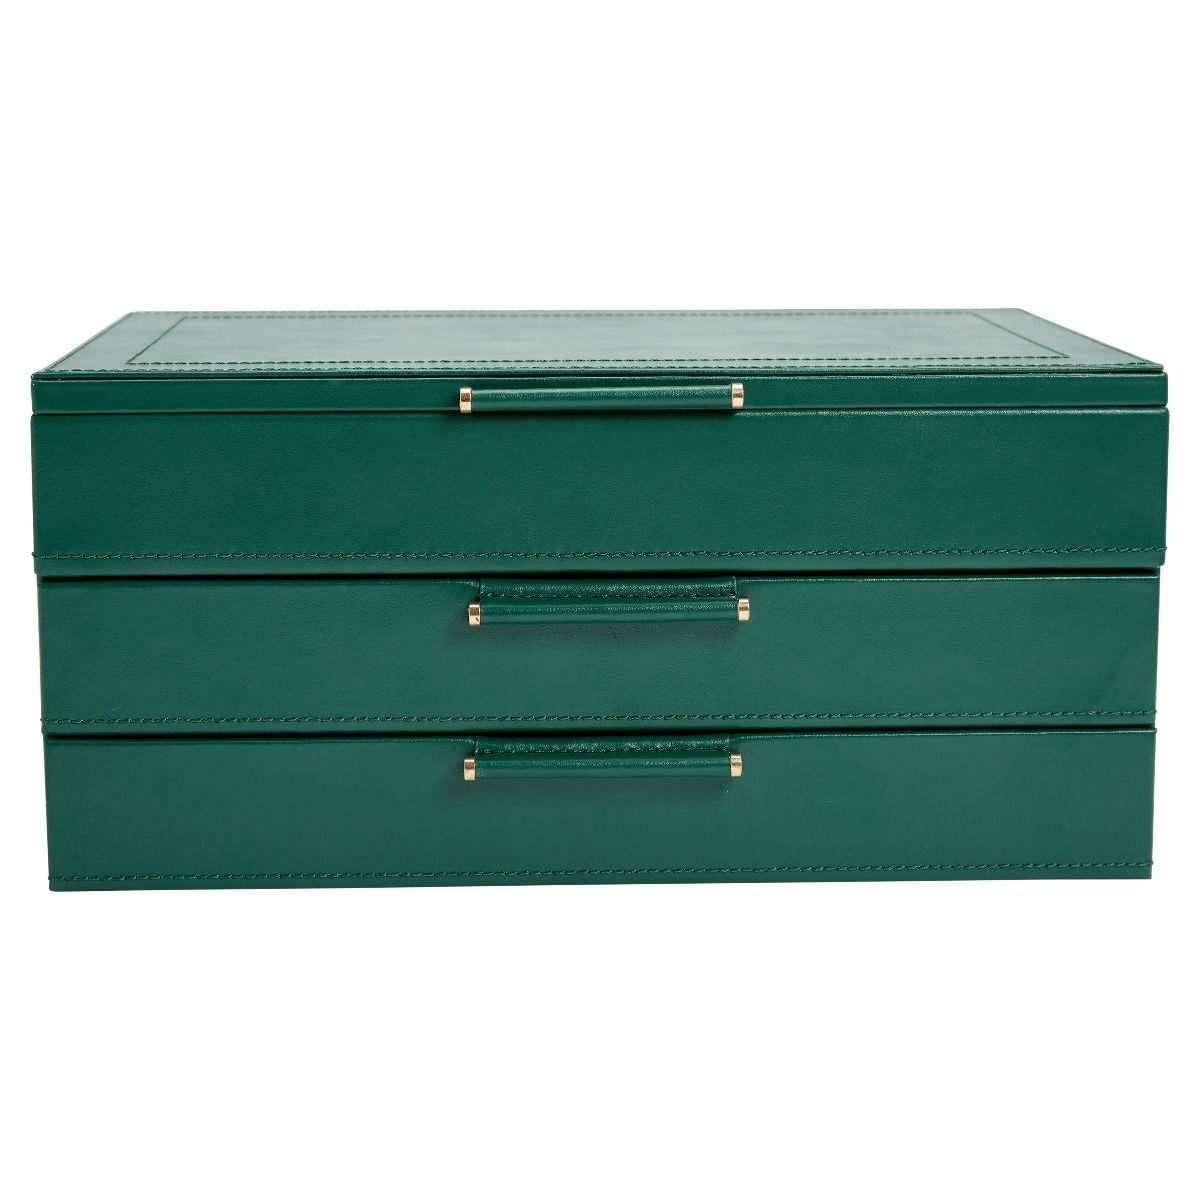 WOLF Sophia Forest Green Jewelry Box With Drawers 392012